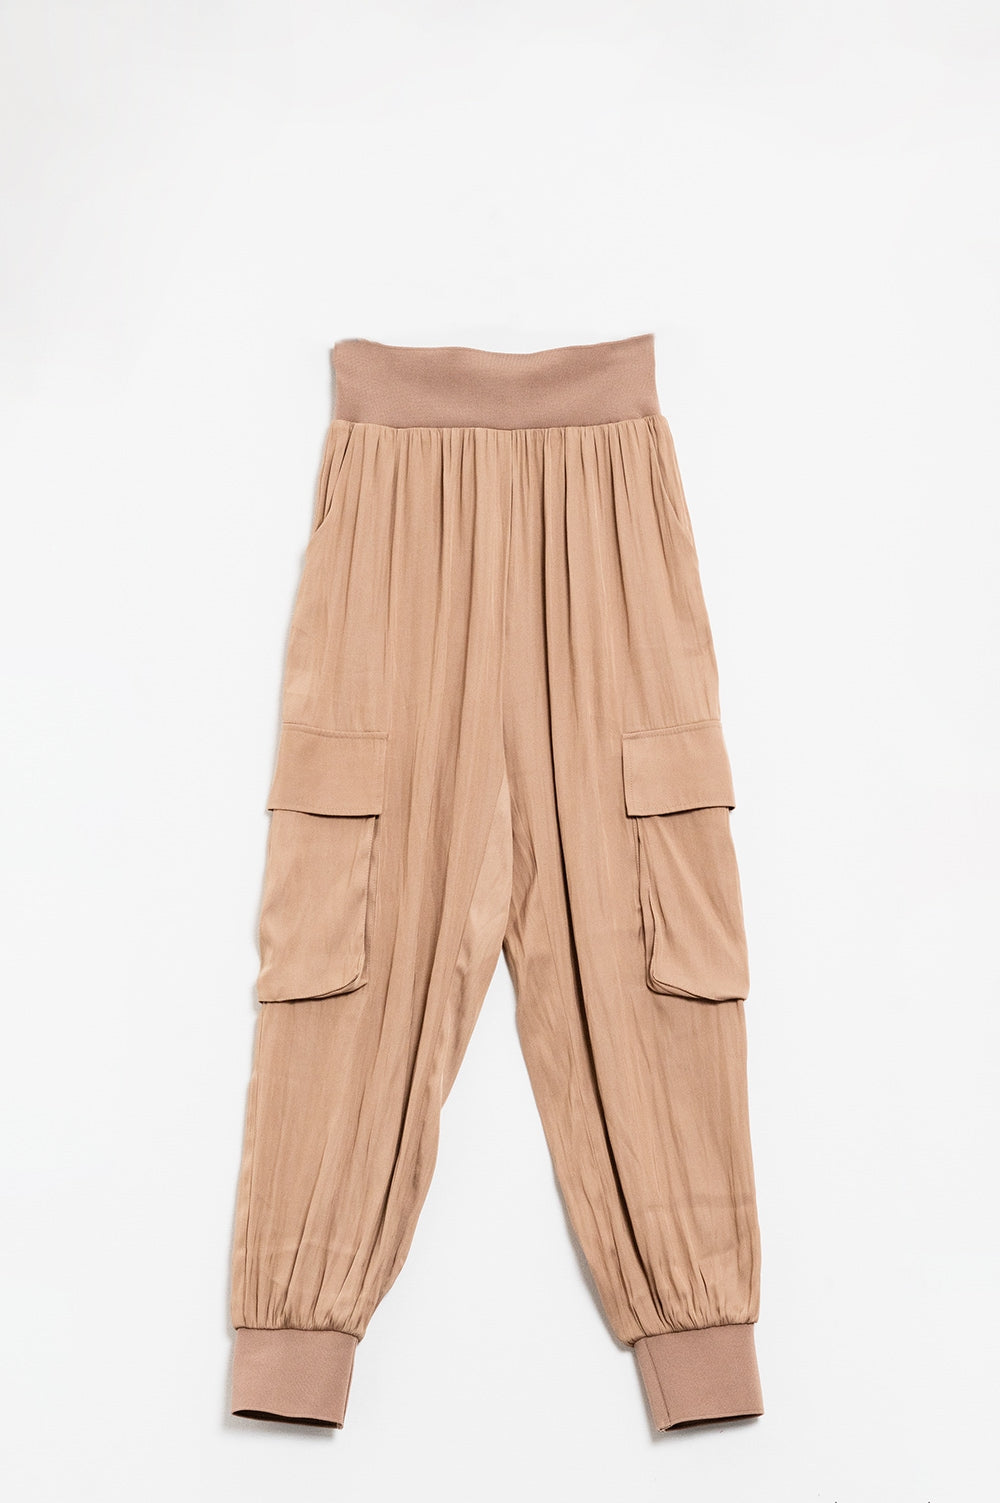 Q2 Cargo Pants With Elastic Waistband in Cream